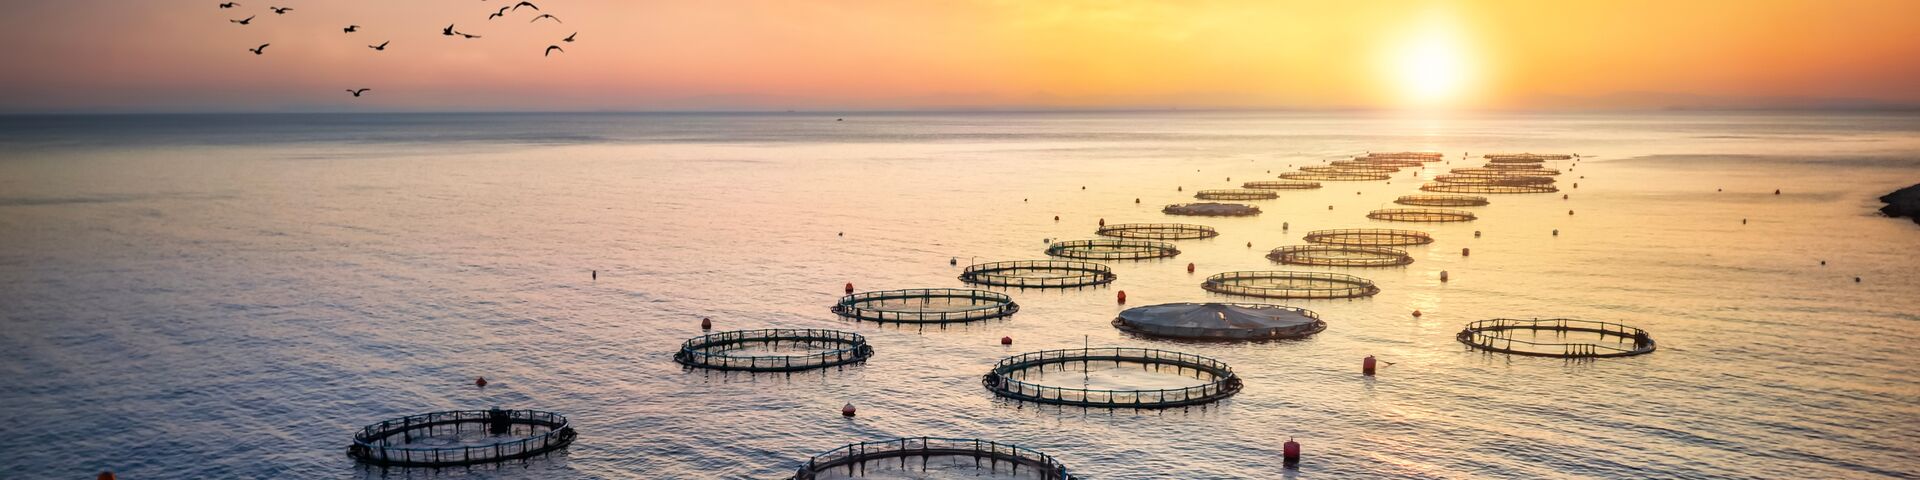 sea at sunset with farmed fishes